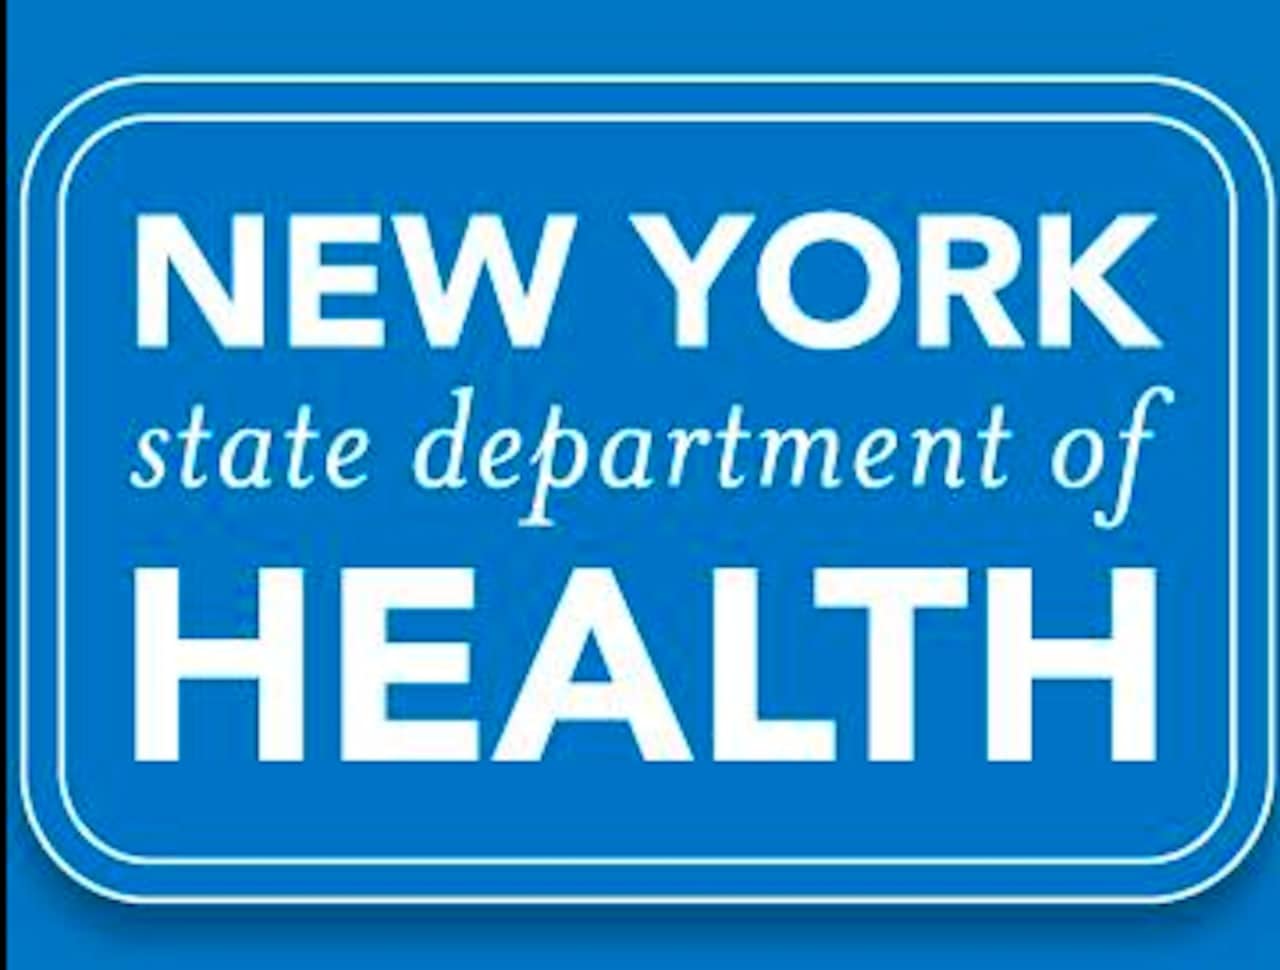 The New York State Department of Health issued an alert Saturday for parts of the Hudson Valley as well as New York City regarding potential measles exposure.